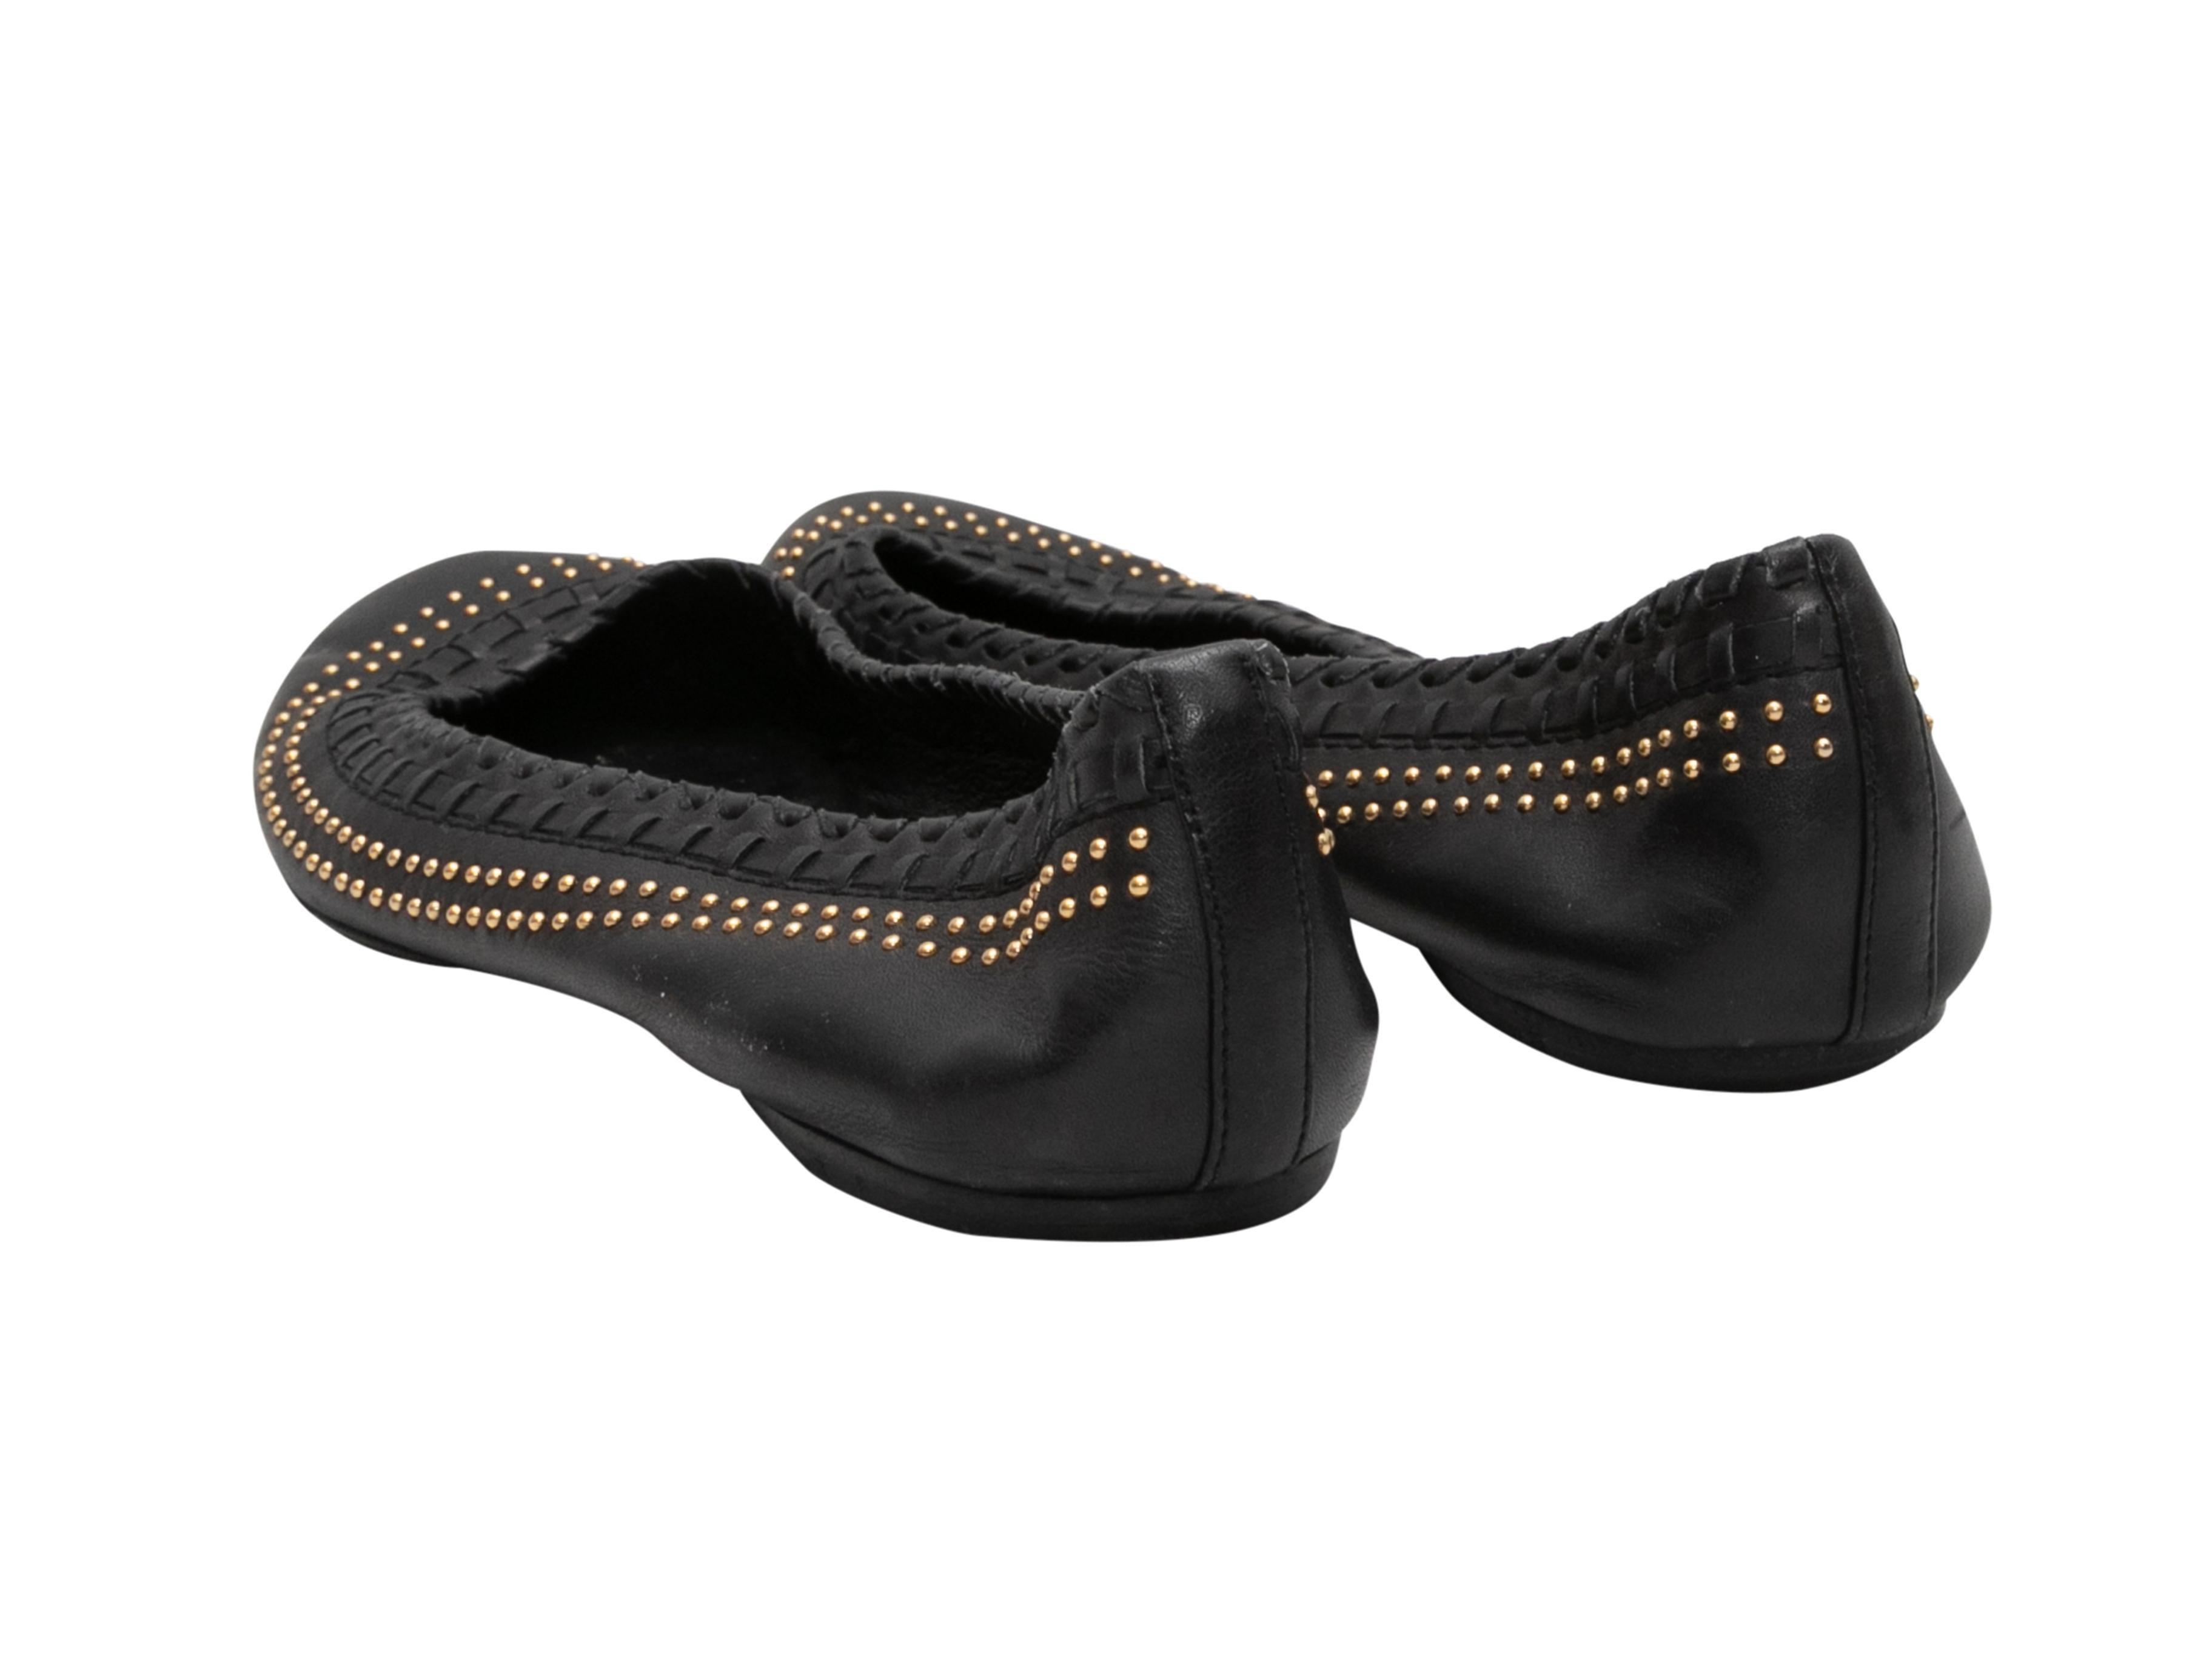 Black leather ballet flats by Gucci. Woven and gold-tone stud detailing at trim.